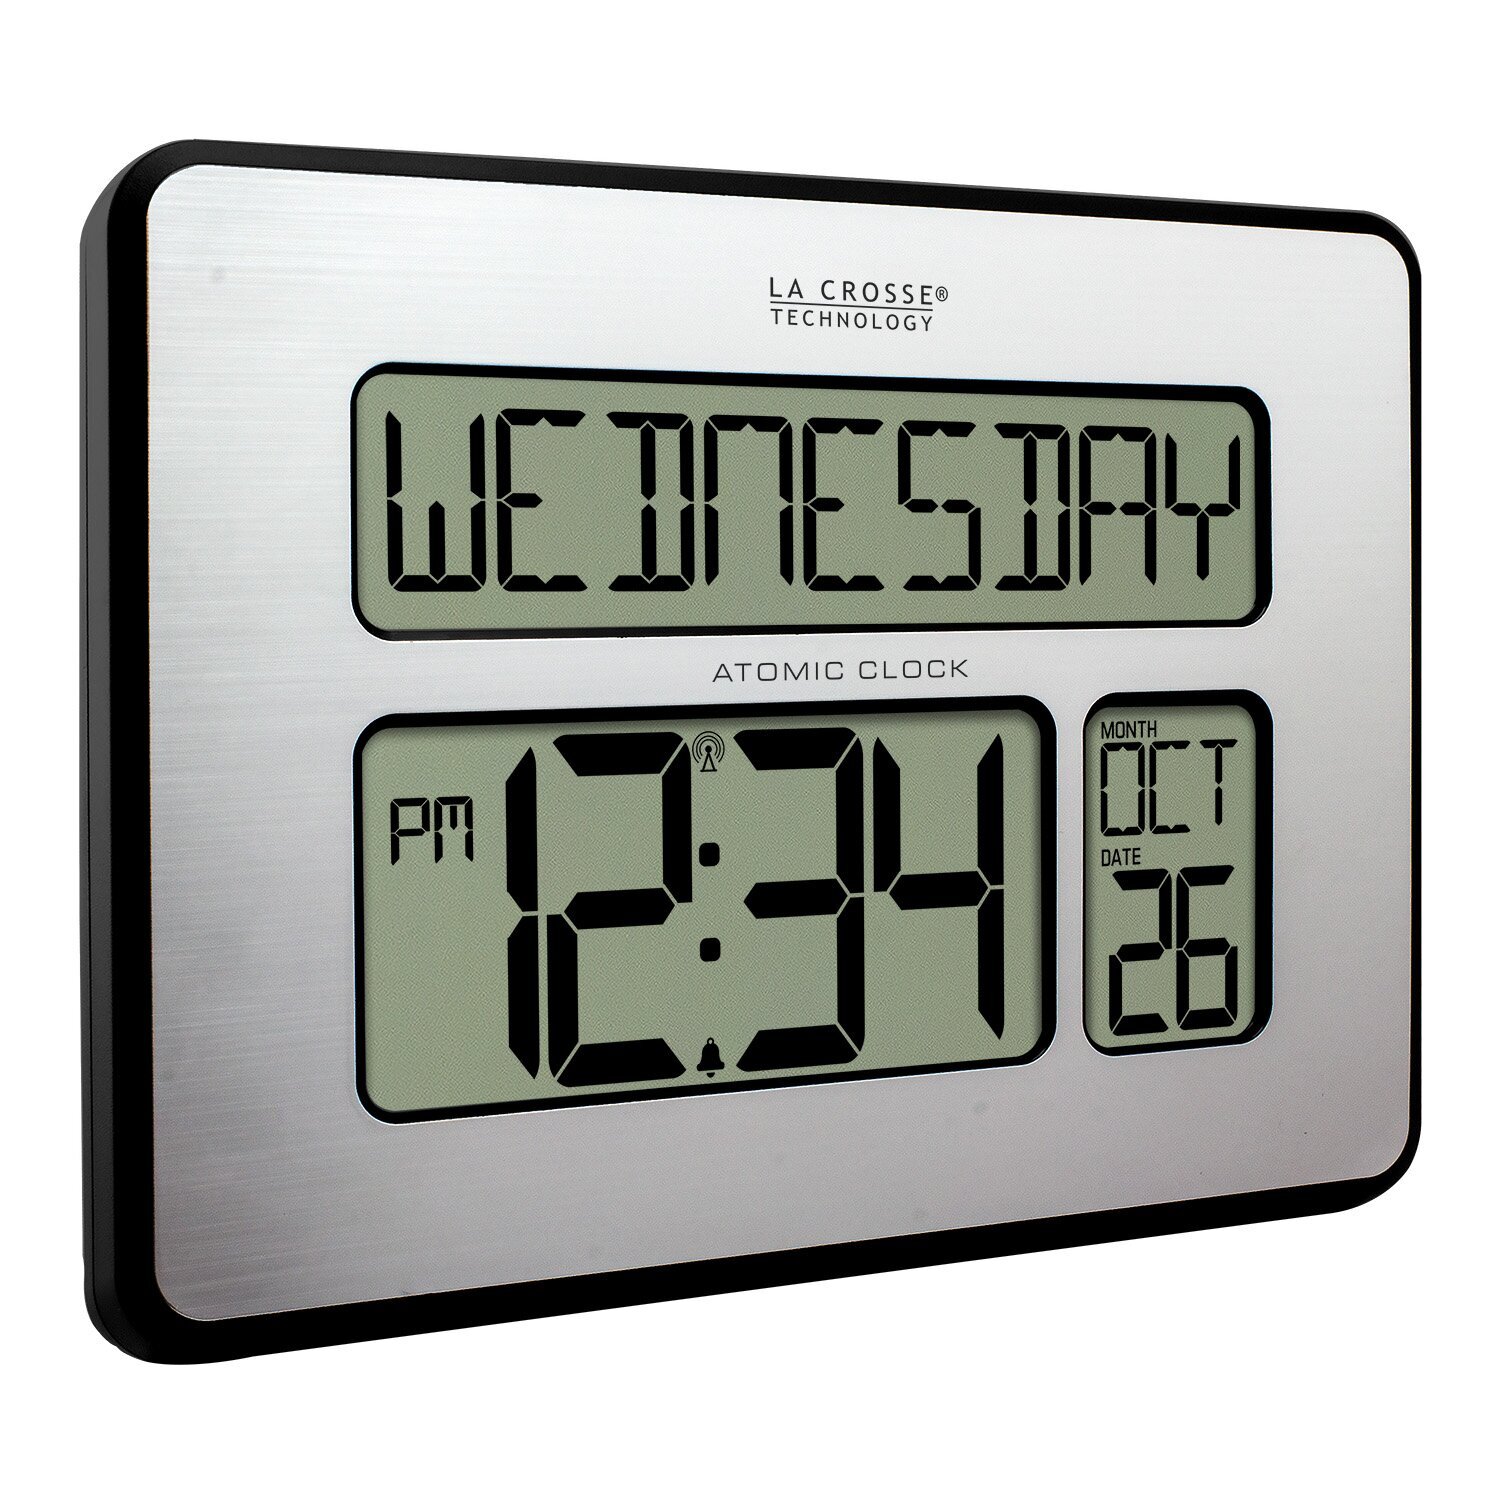 Three screen Full Calendar Wall Clock with Date and Time